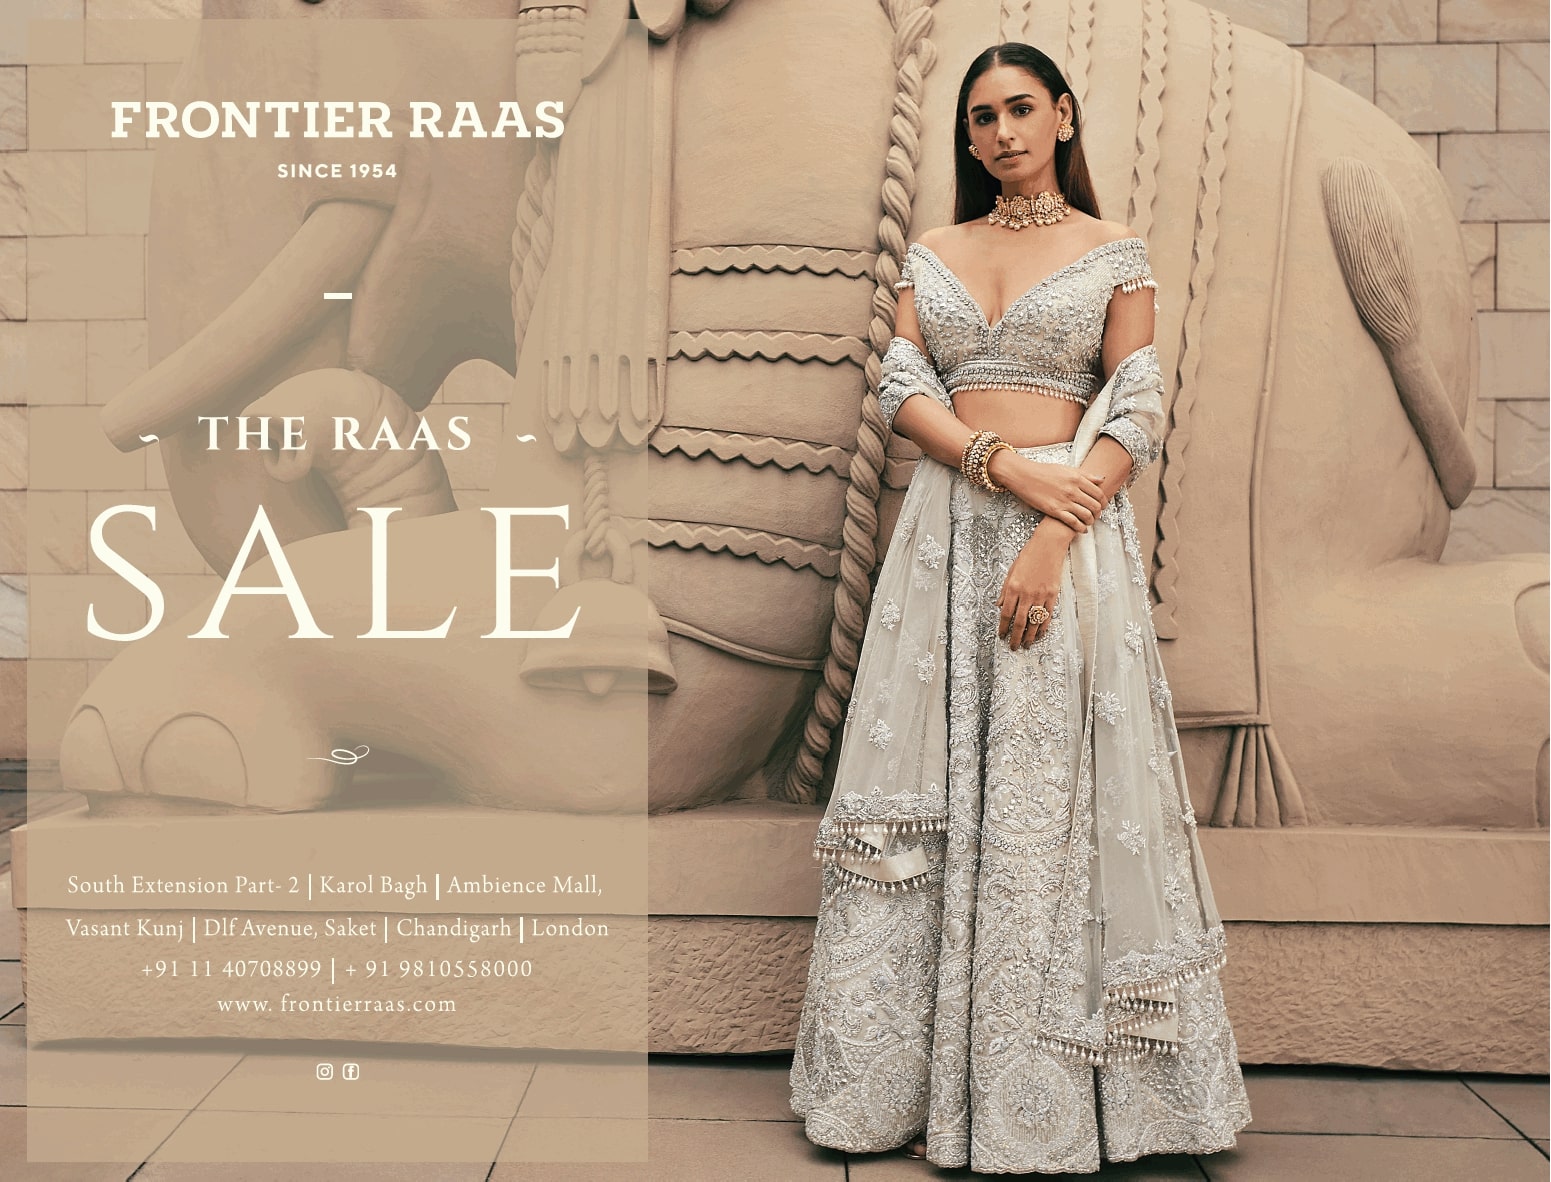 frontier-raas-the-raas-sale-ad-delhi-times-20-02-2021